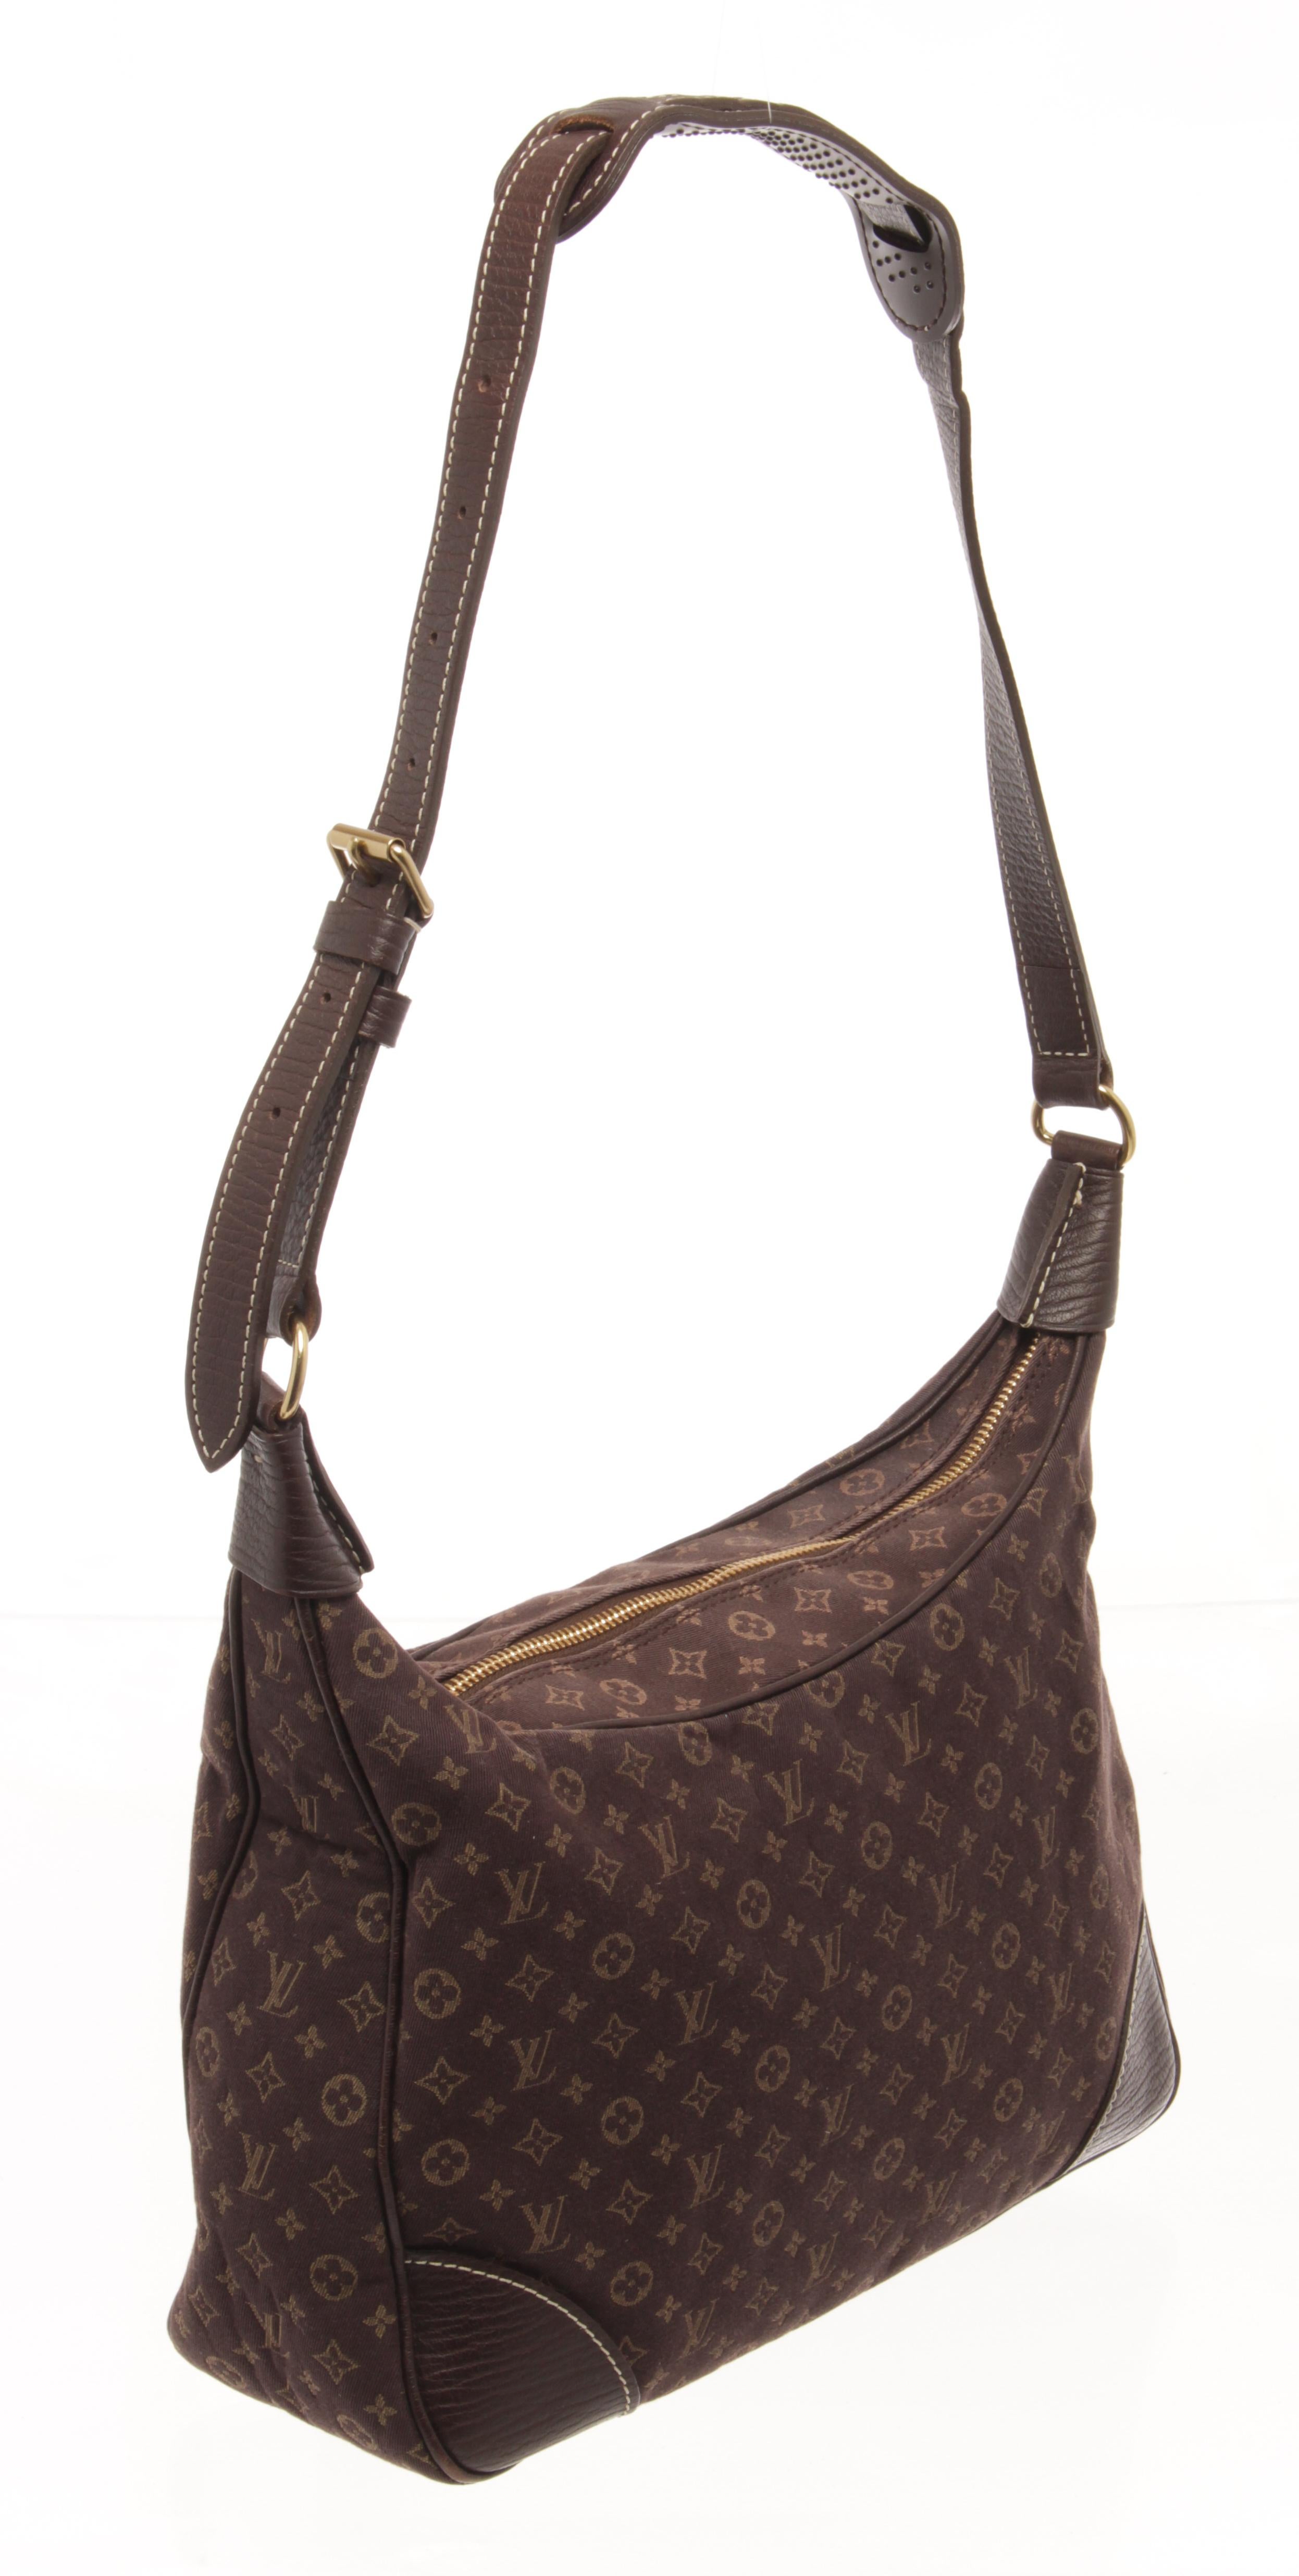 dark brown monogram mini lin canvas, this elegant shoulder bag with gold-tone hardware accents, its top zip closure opens to a brown fabric-lined interior with zip and slip pockets perfect for daily essentials.

87120MSC